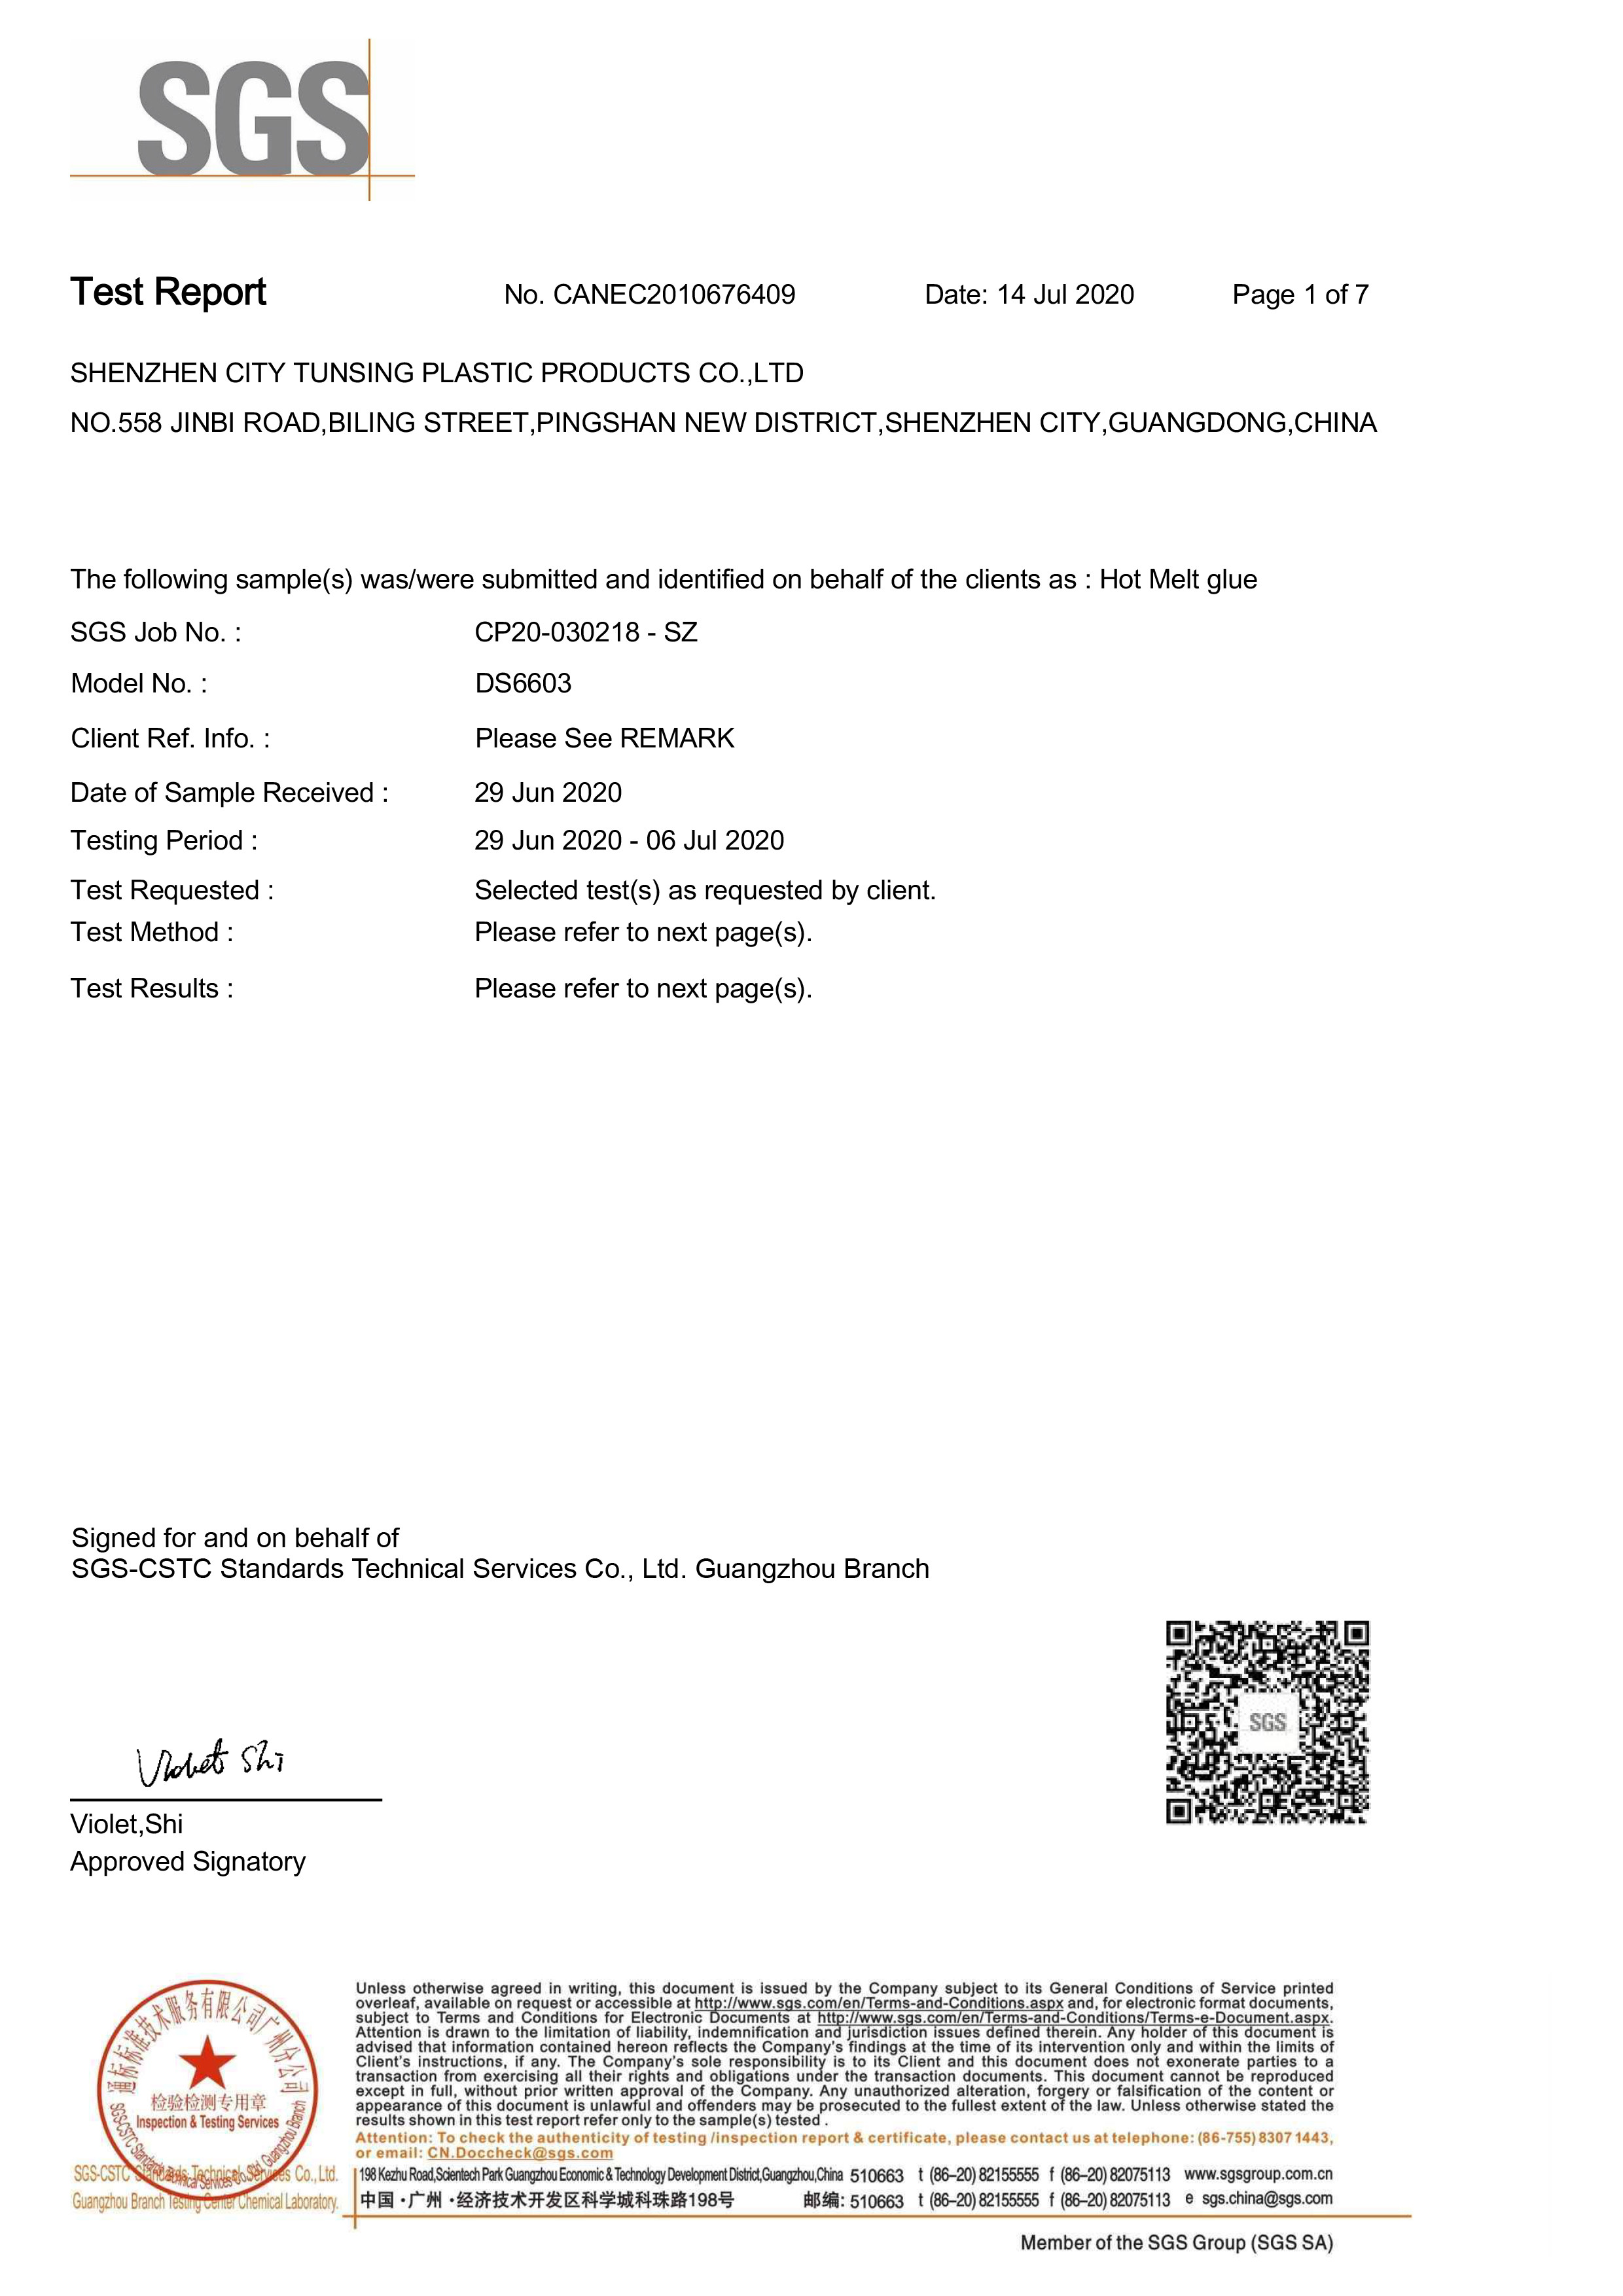 Shenzhen Tunsing Plastic Products Co., Ltd. Certifications